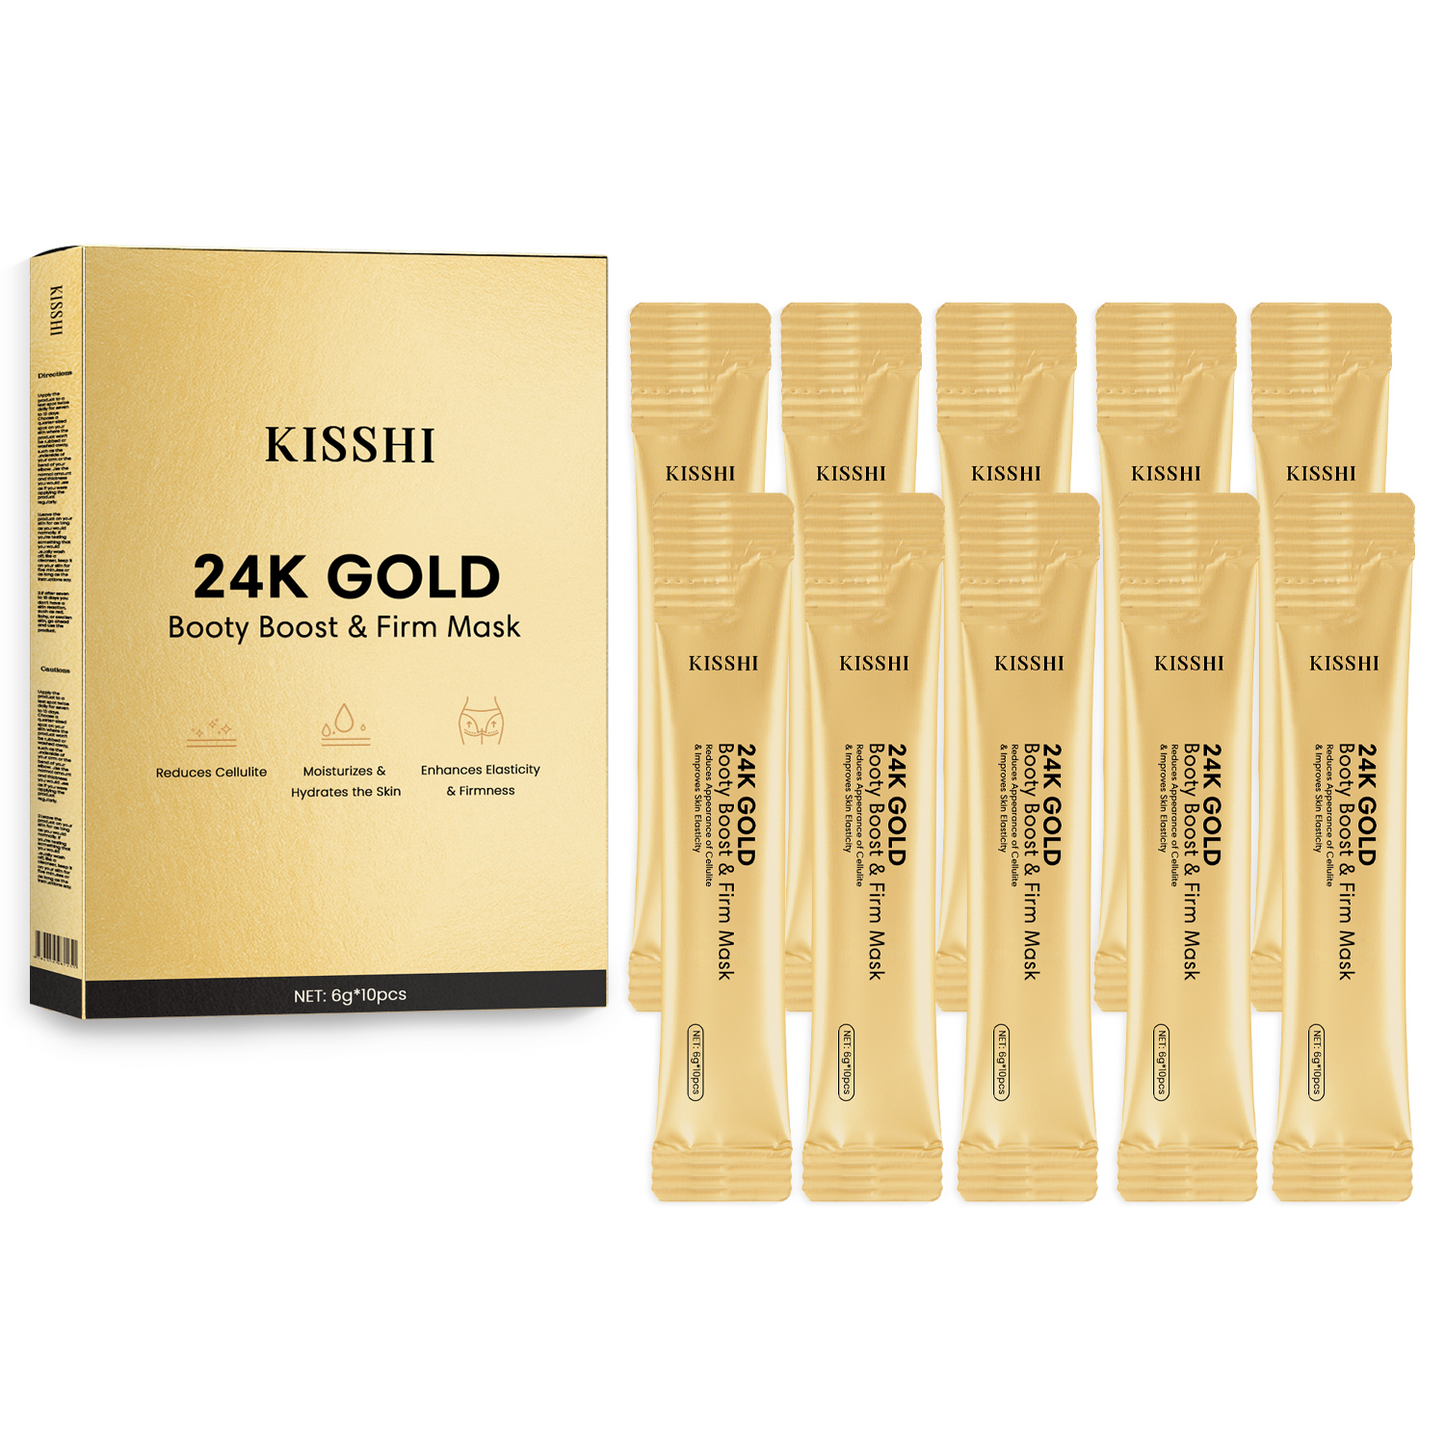 KISSHI™ 24K Gold Booty Boost & Firm Mask